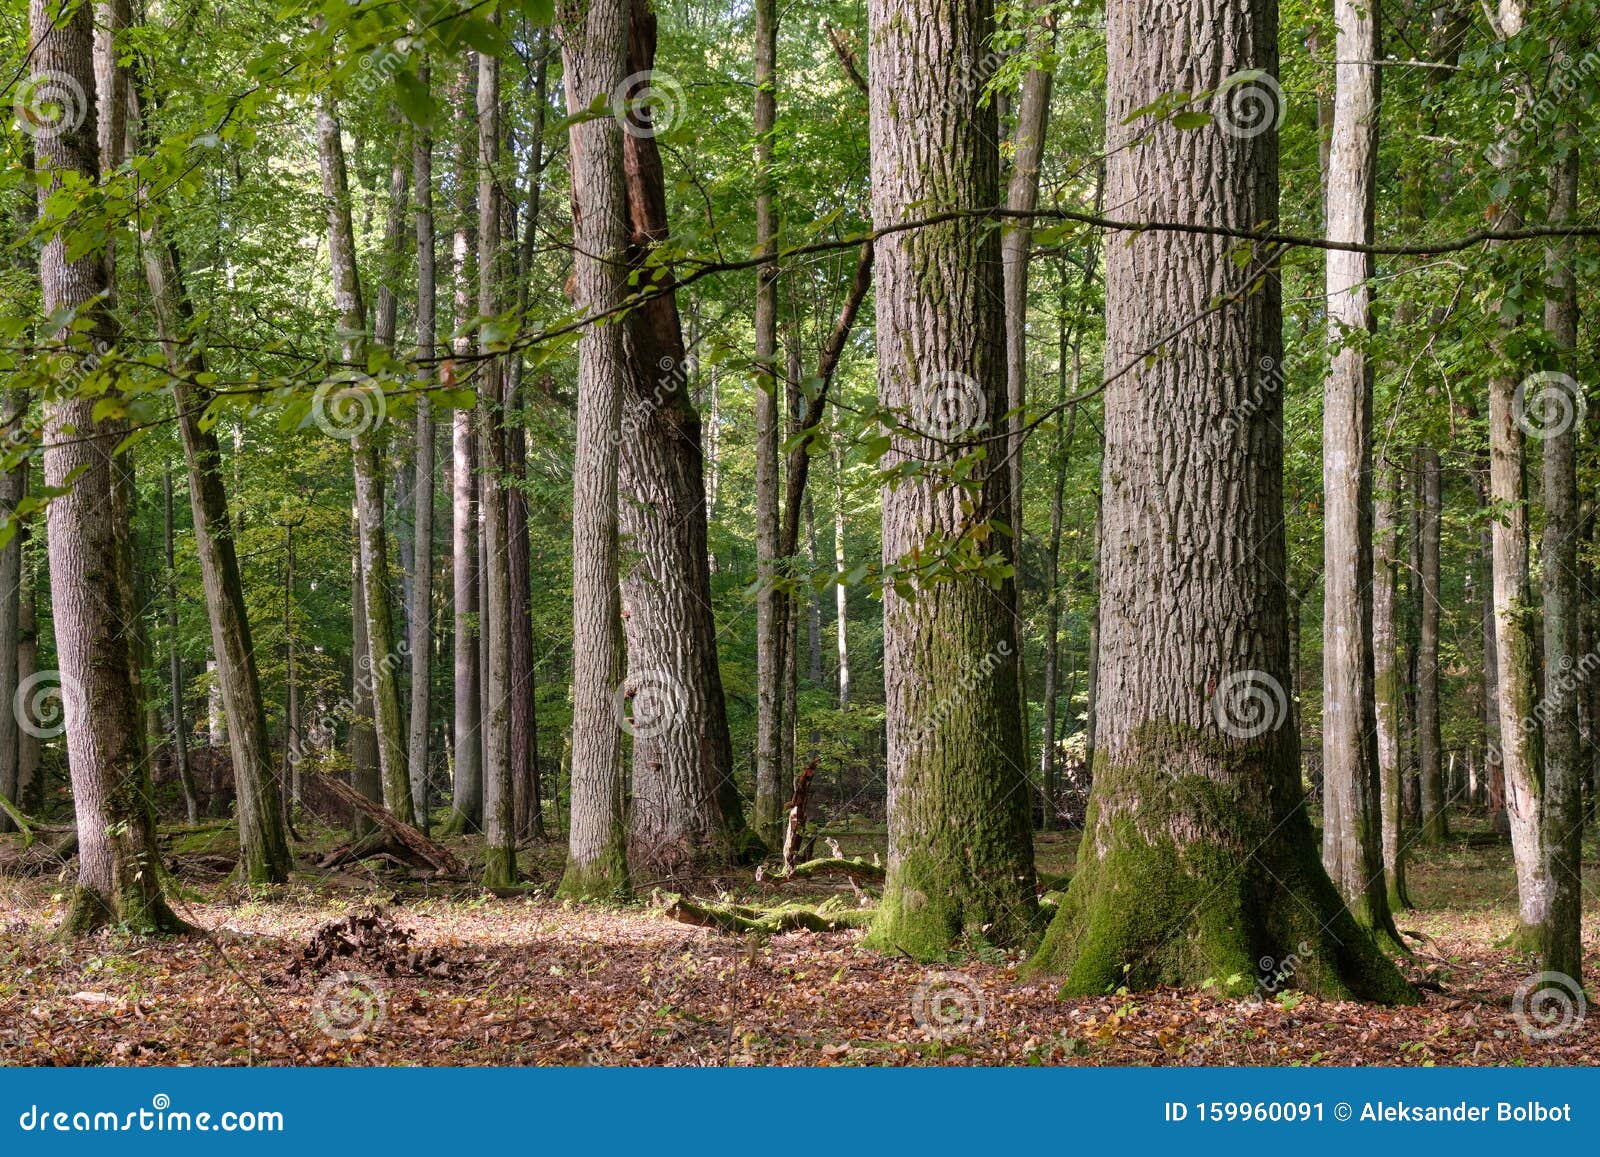 Group of Old Oaks in Autumn Stock Image - Image of outdoor, robur ...